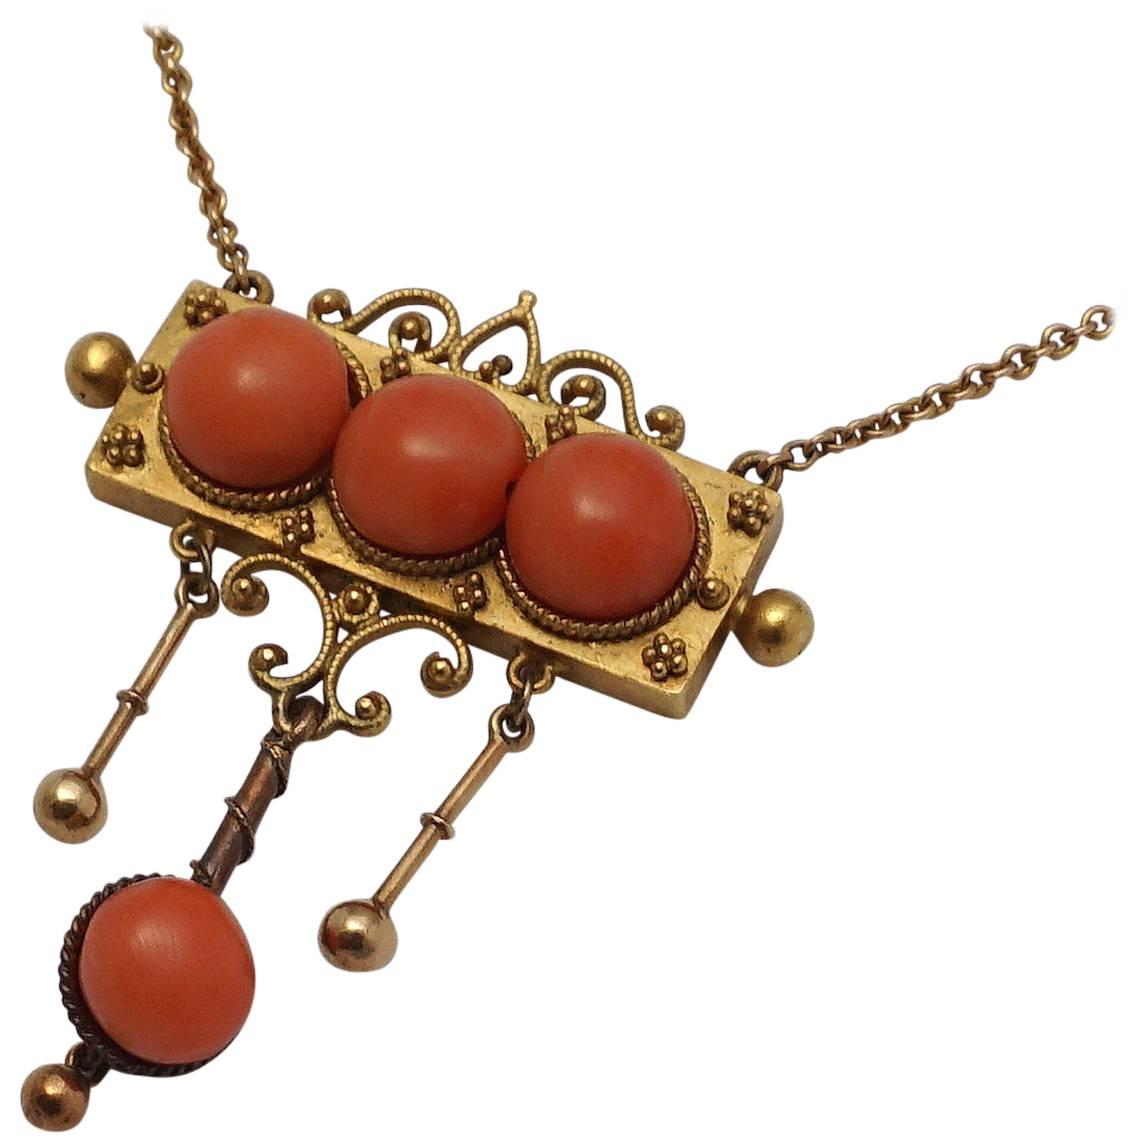 A beautiful victorian period coral, and 18 karat yellow gold necklace. Designed as a central plaque set with three cabochon cut coral. From this central plaque, are three dangling gold ornaments, one of which is also set with a coral cabochon.

In